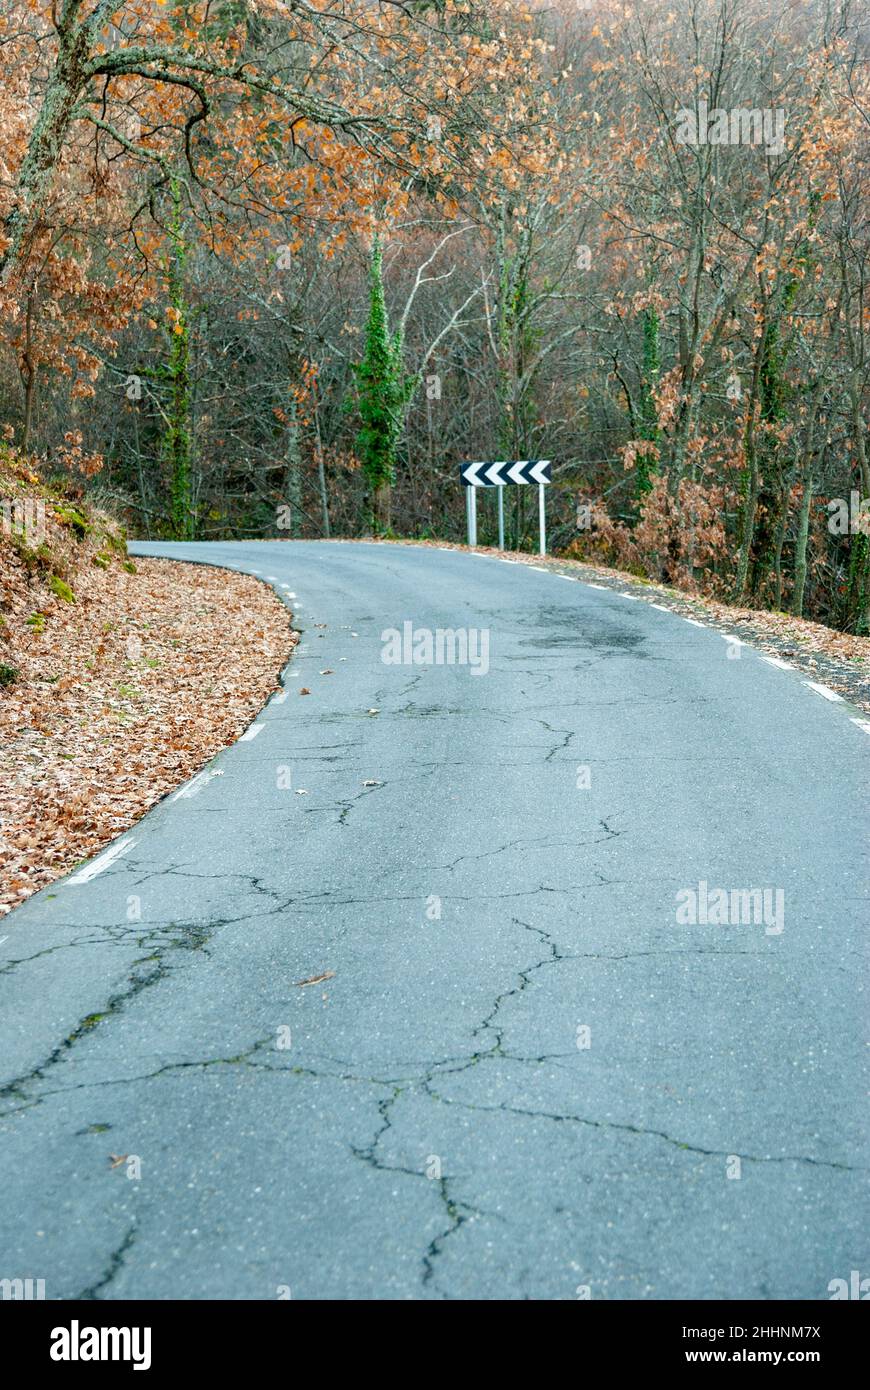 Curve direction sign on mountain road full of fallen leaves with uneven road surface in autumn Stock Photo